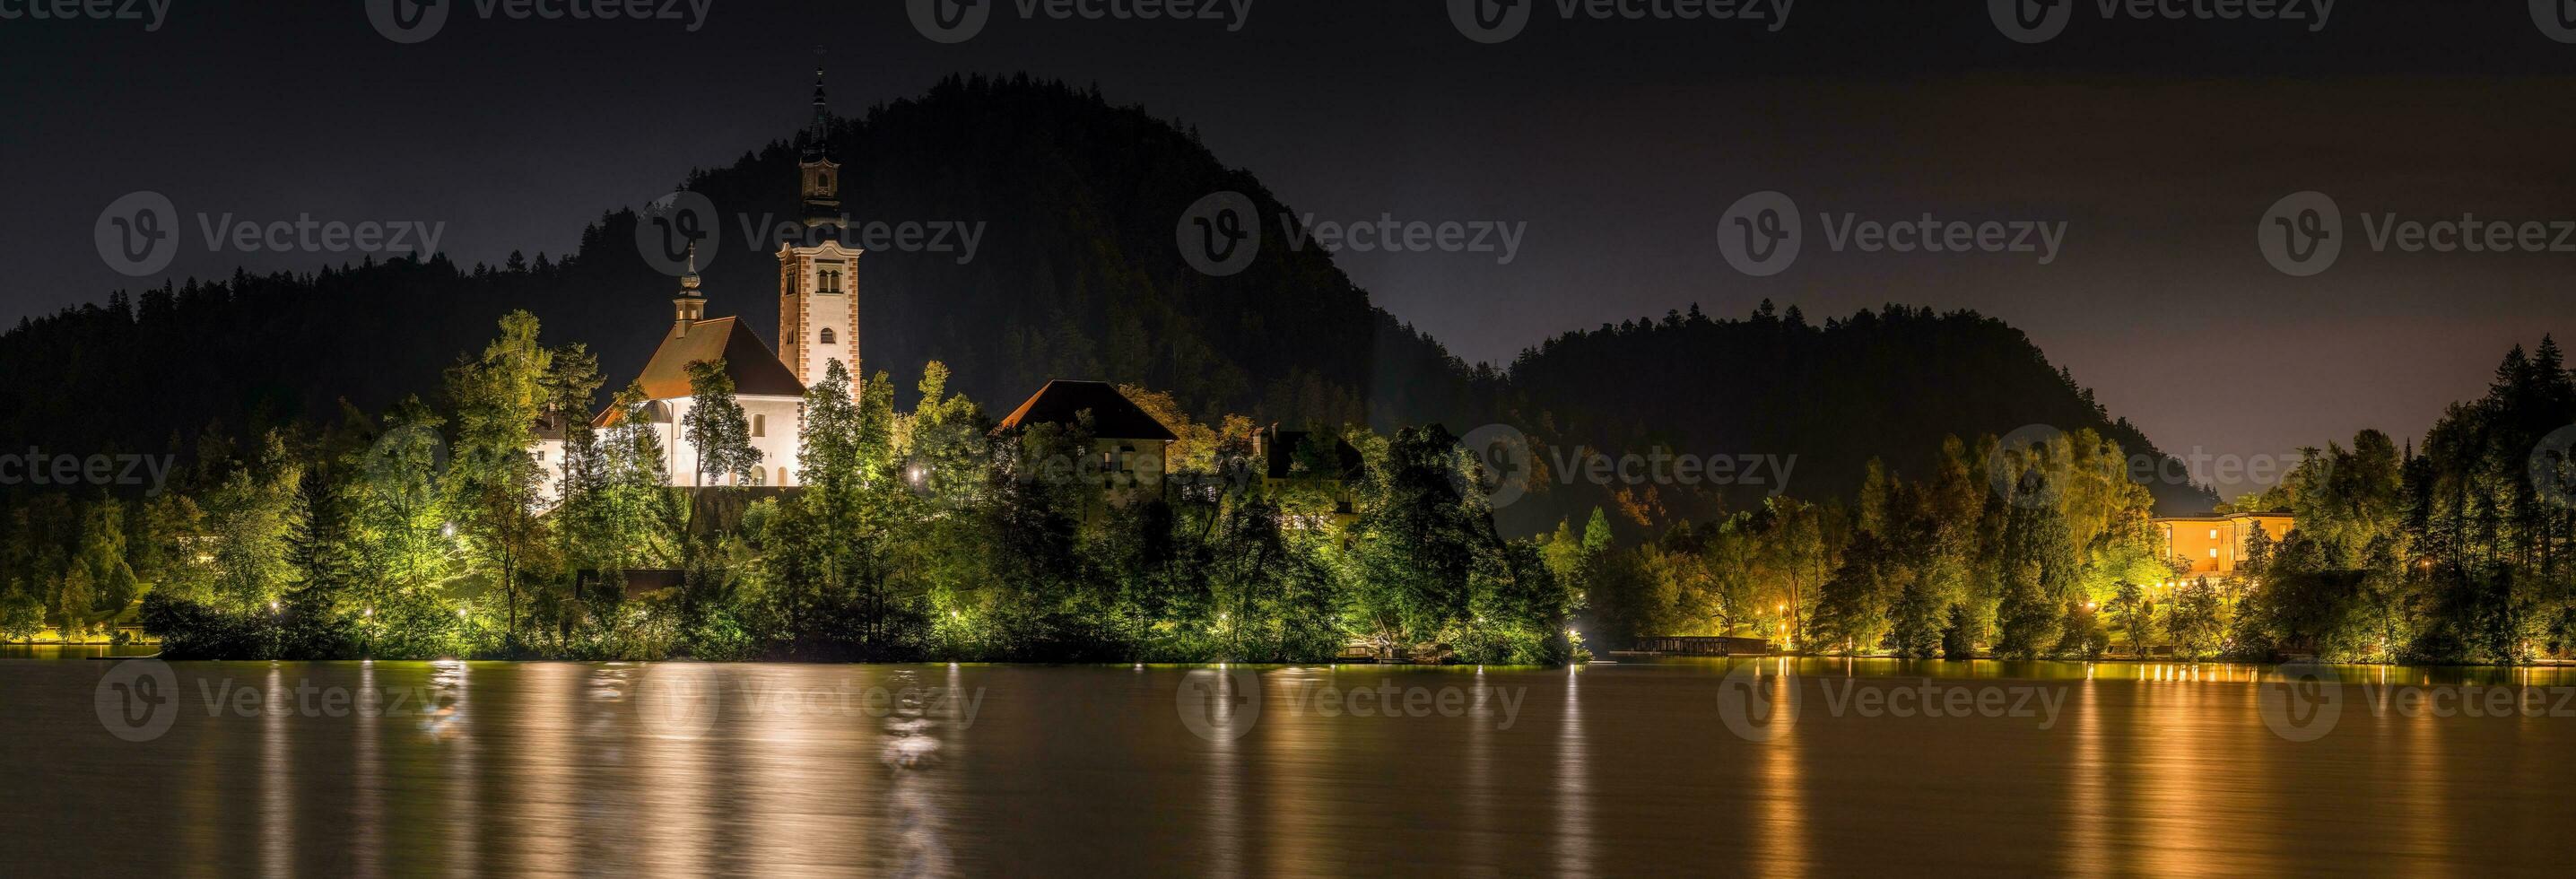 The Sanctuary of the Assumption of the Virgin Mary in Slovenia photo